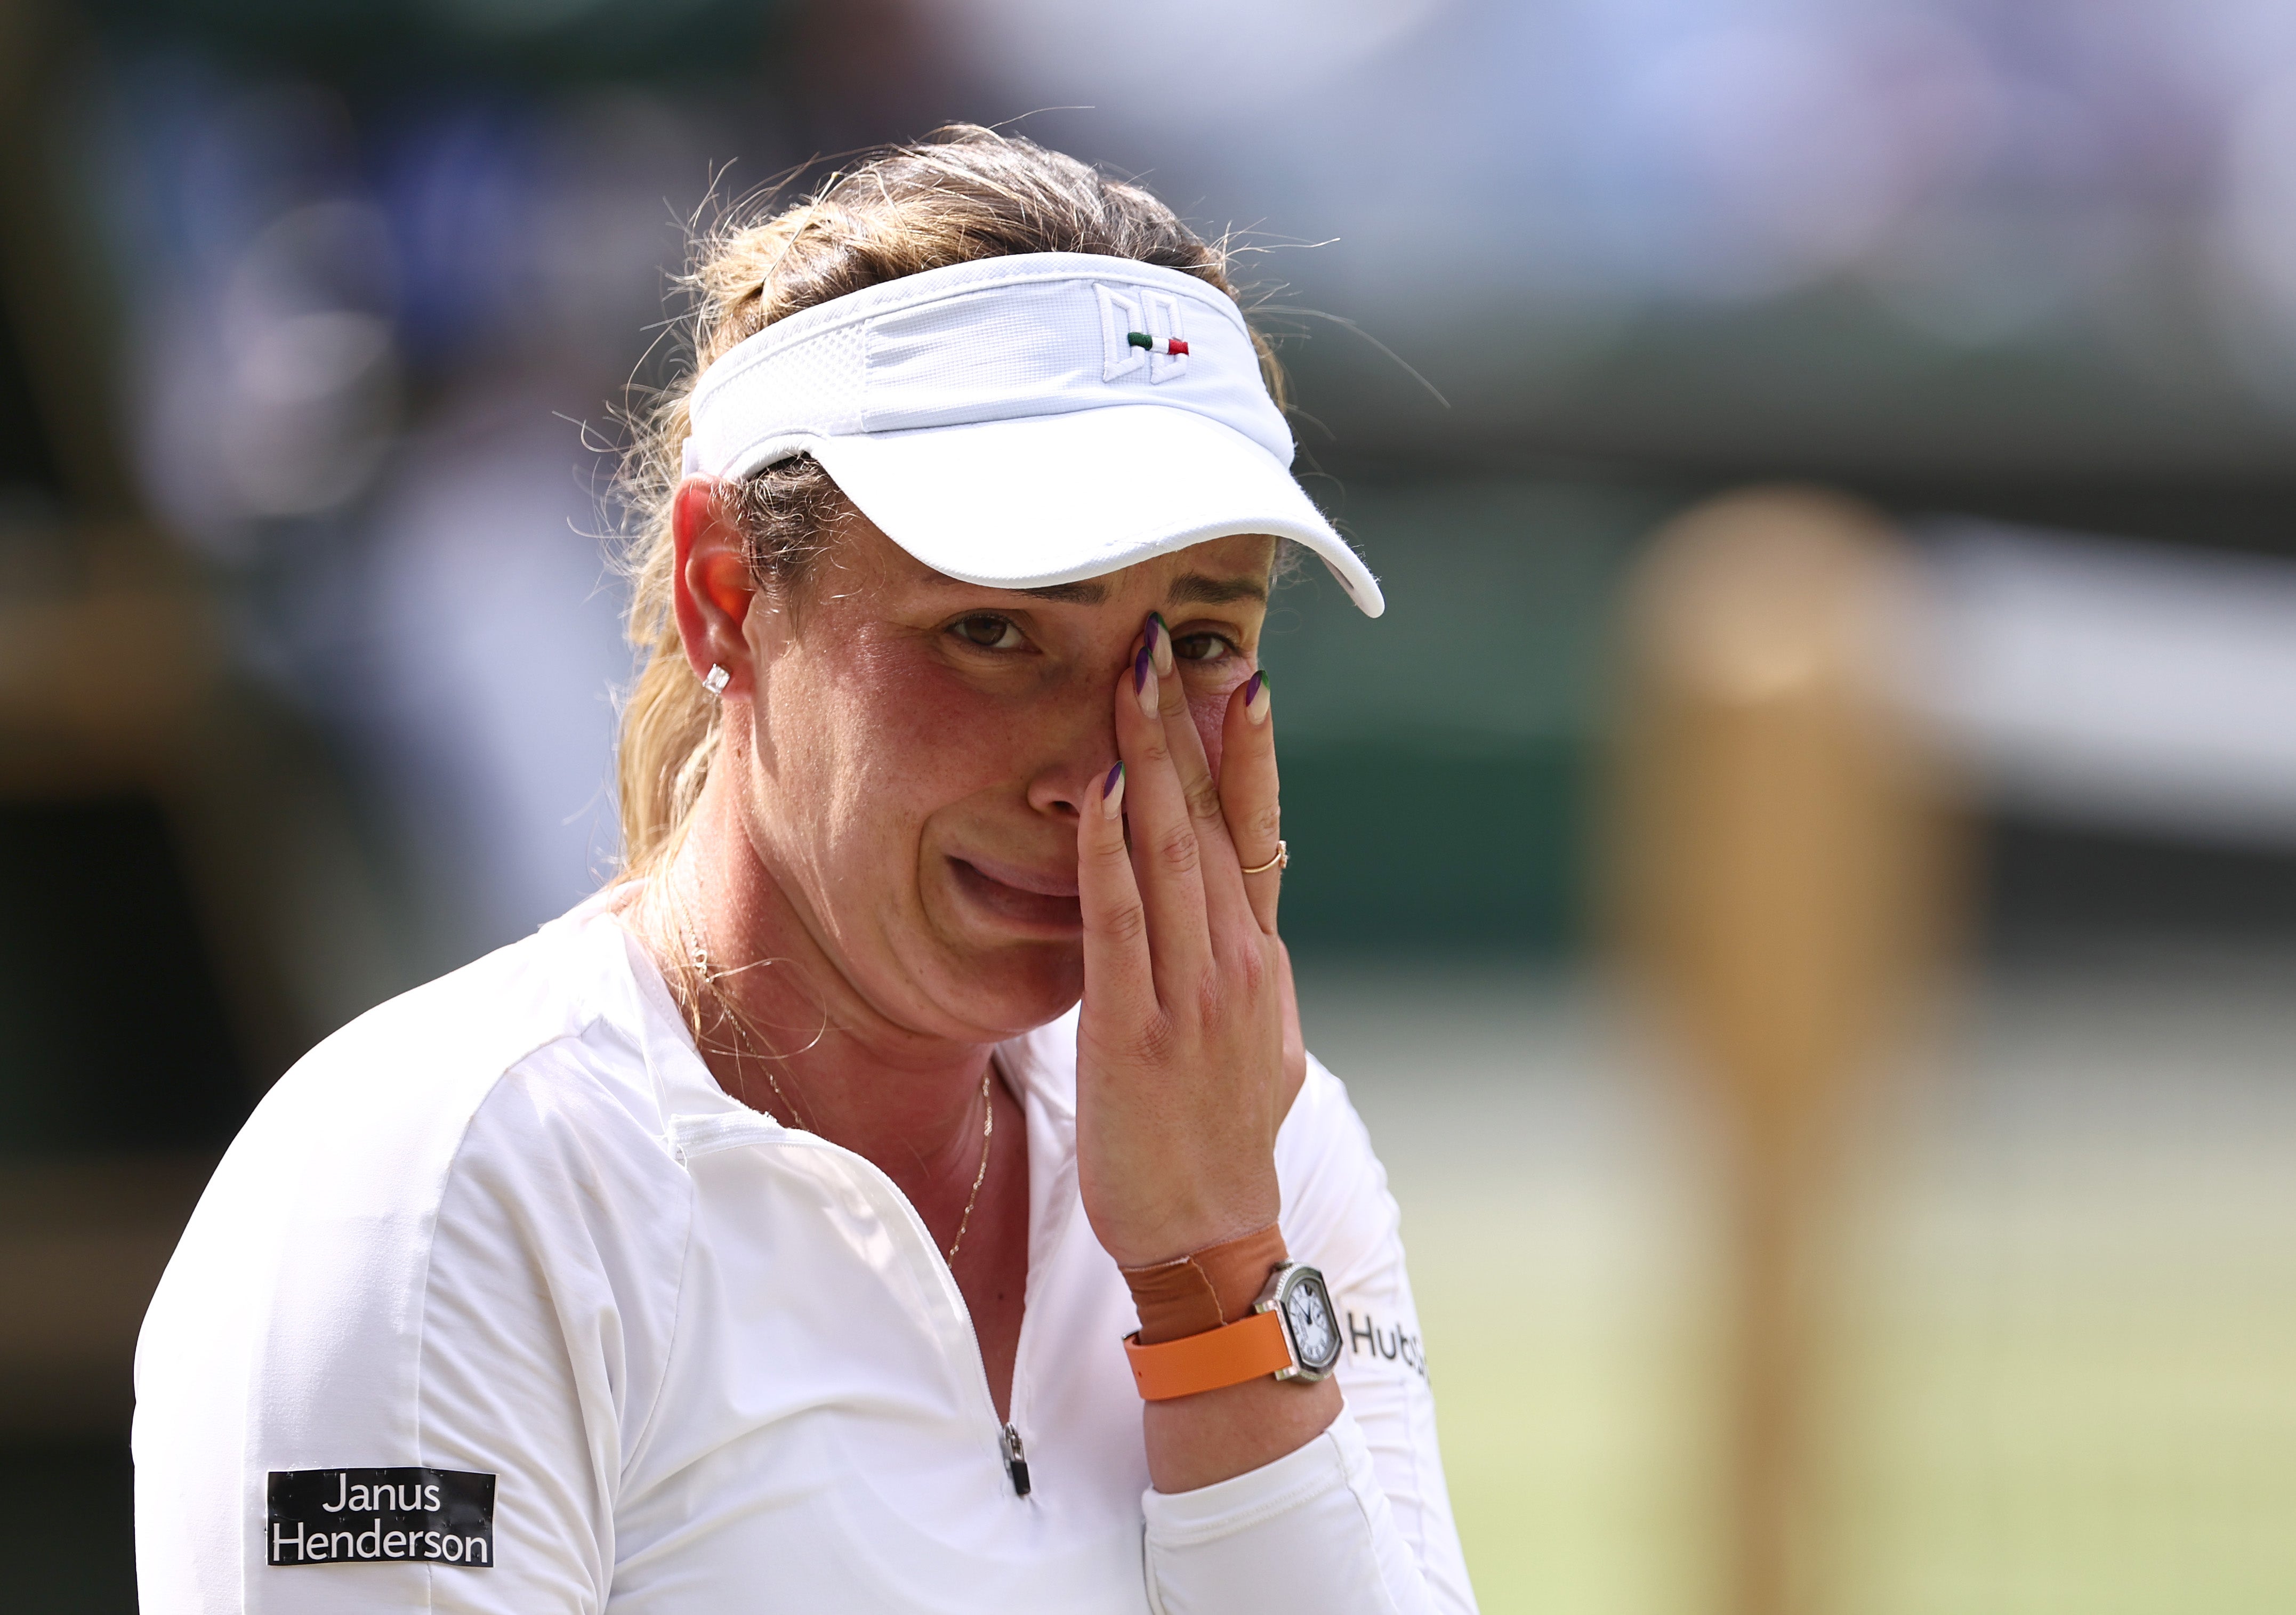 Donna Vekic was in tears by the end of her semi-final